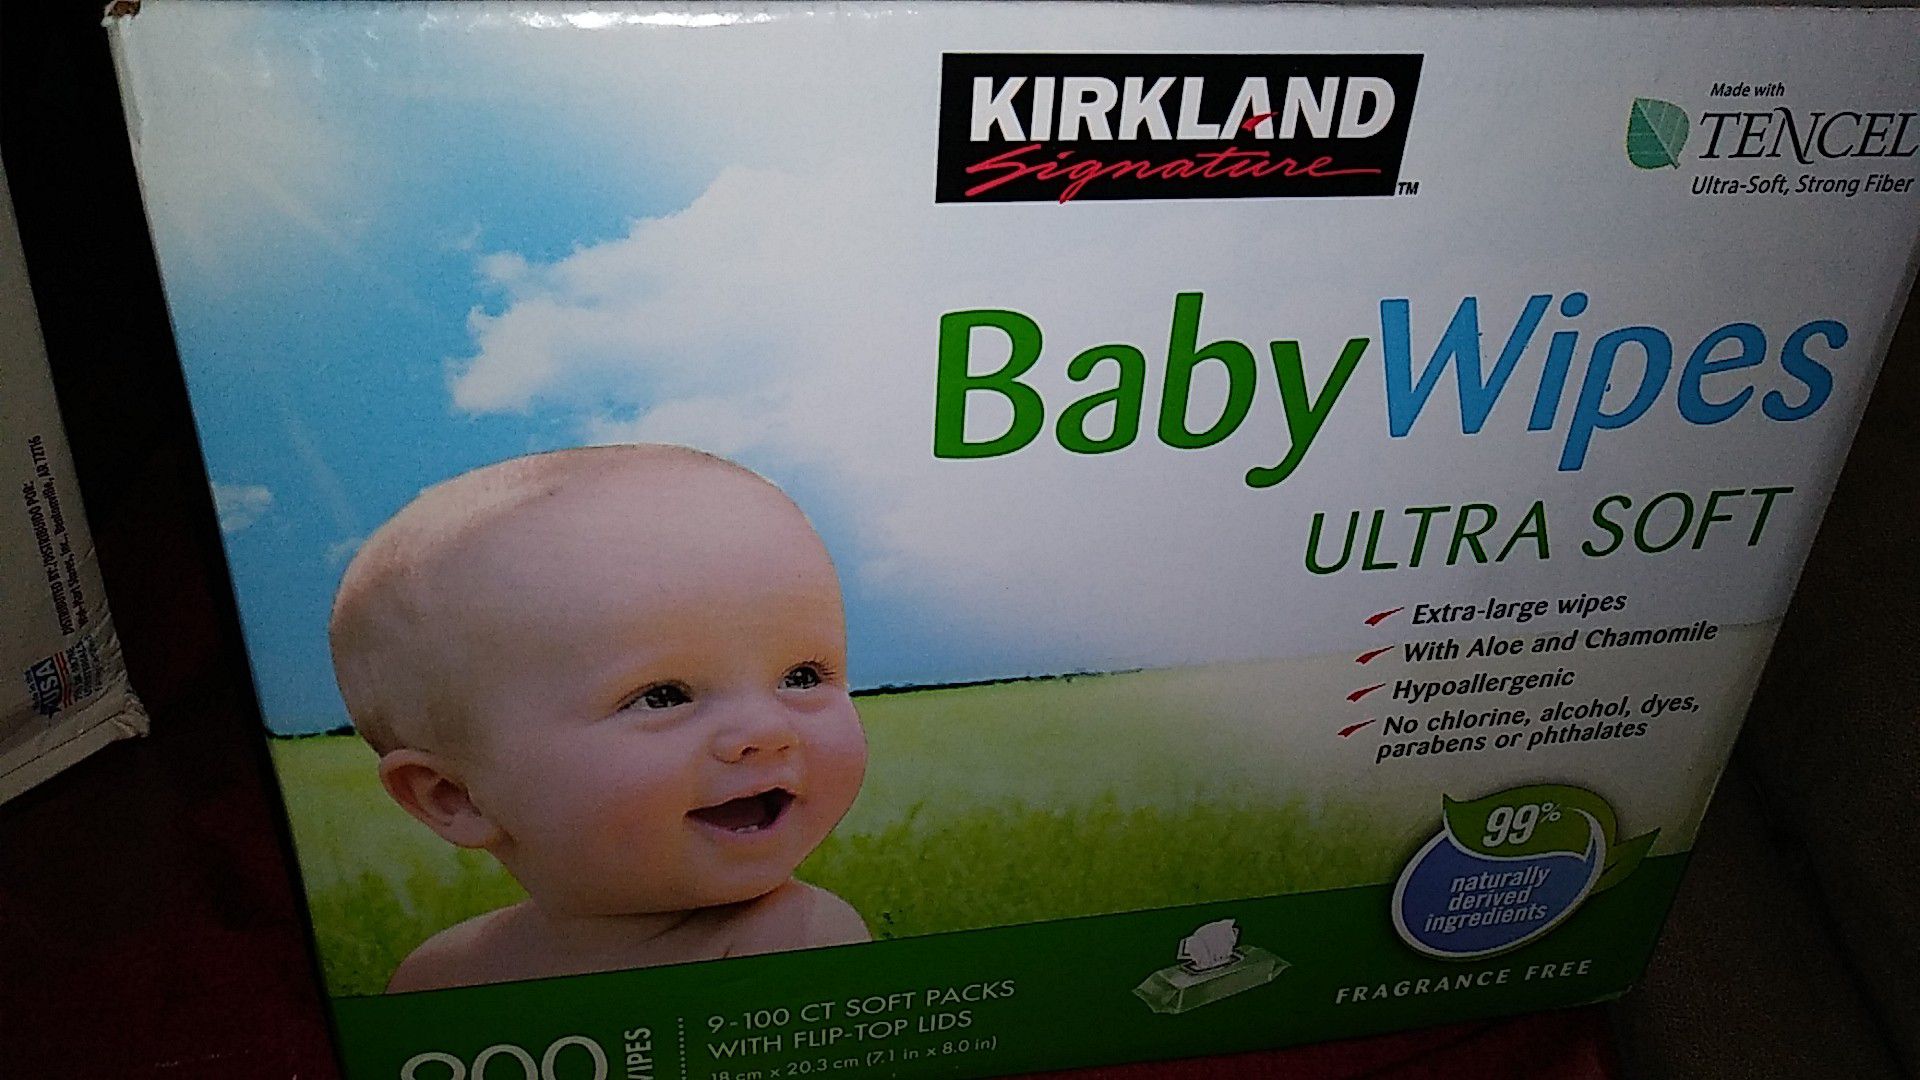 Wipes / pampers